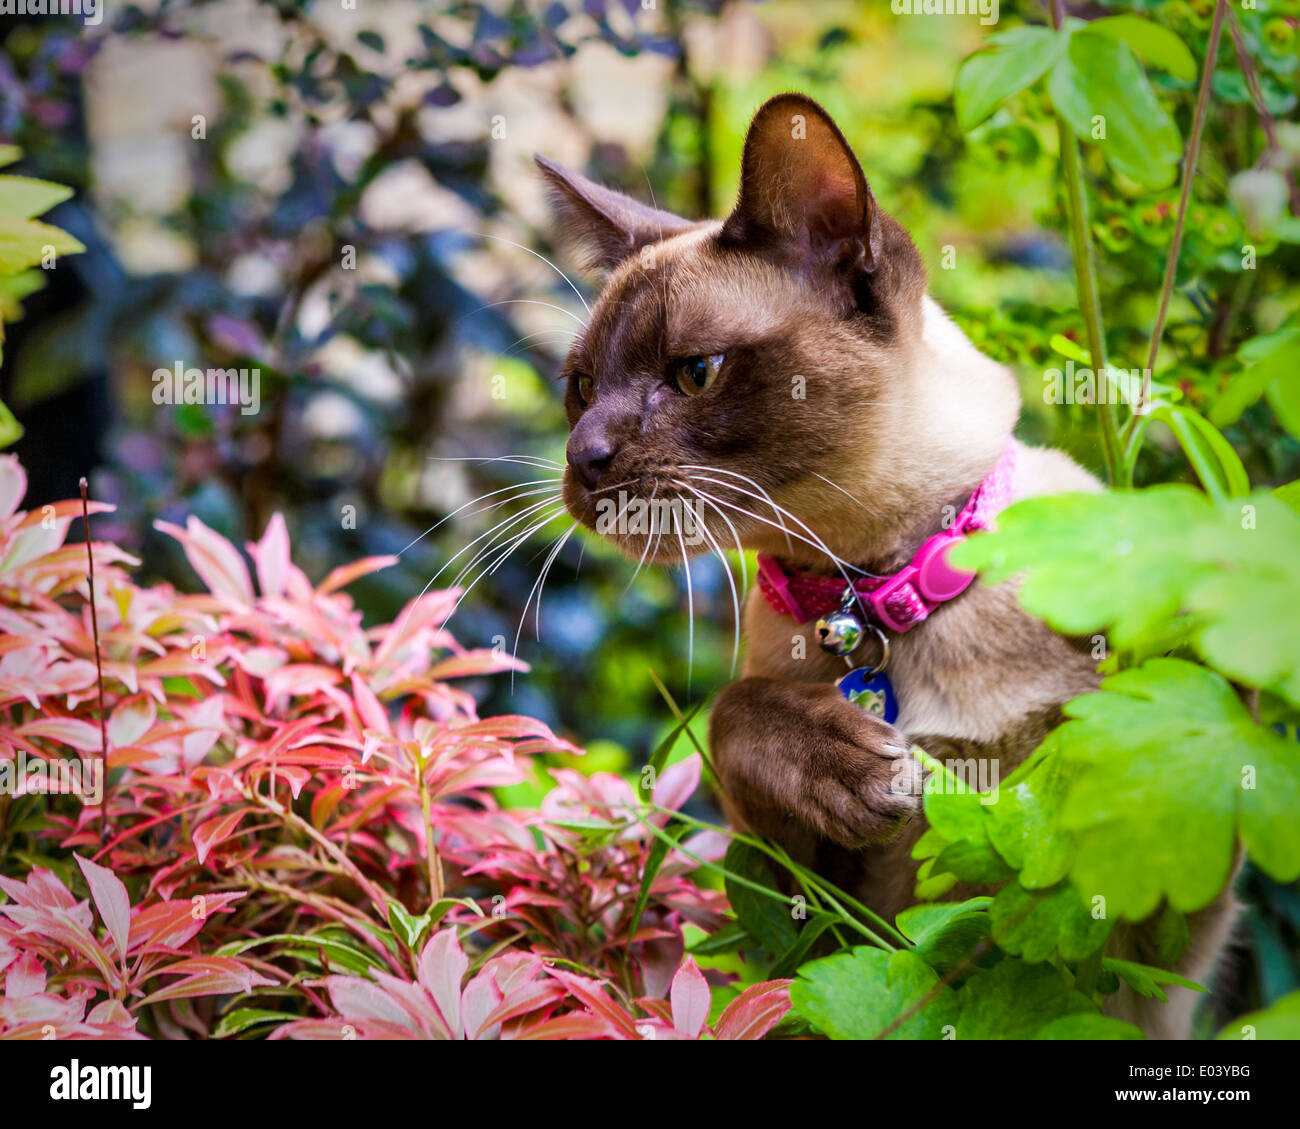 Burmese cat, Felis cats, with pink collar with bell amongst colourful plants in a garden in Spring Stock Photo